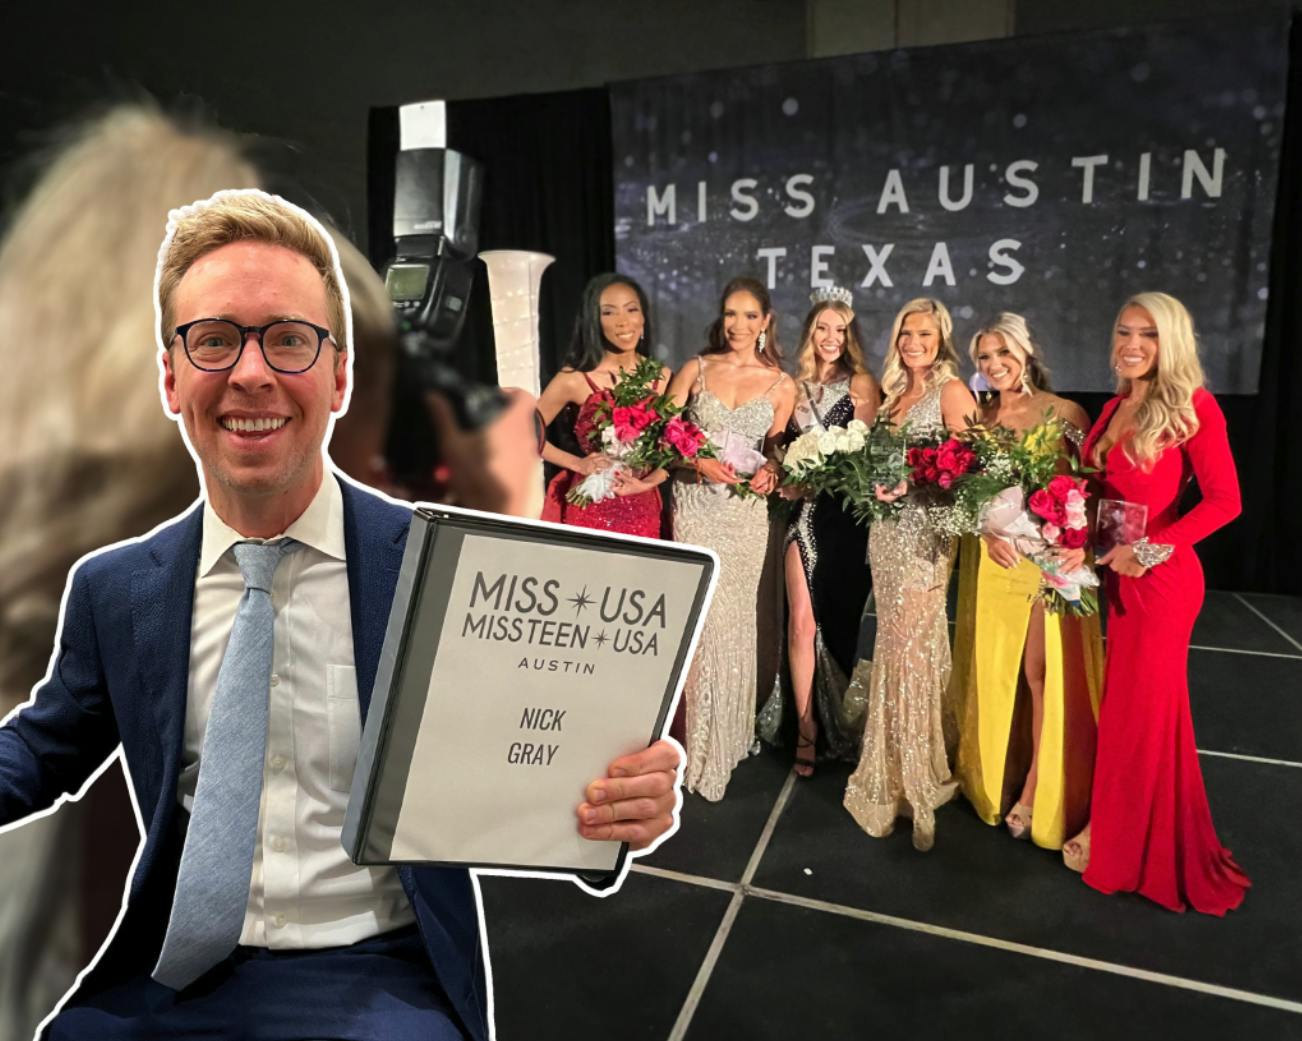 Nick standing in front of the stage with Miss Austin 2022 candidates